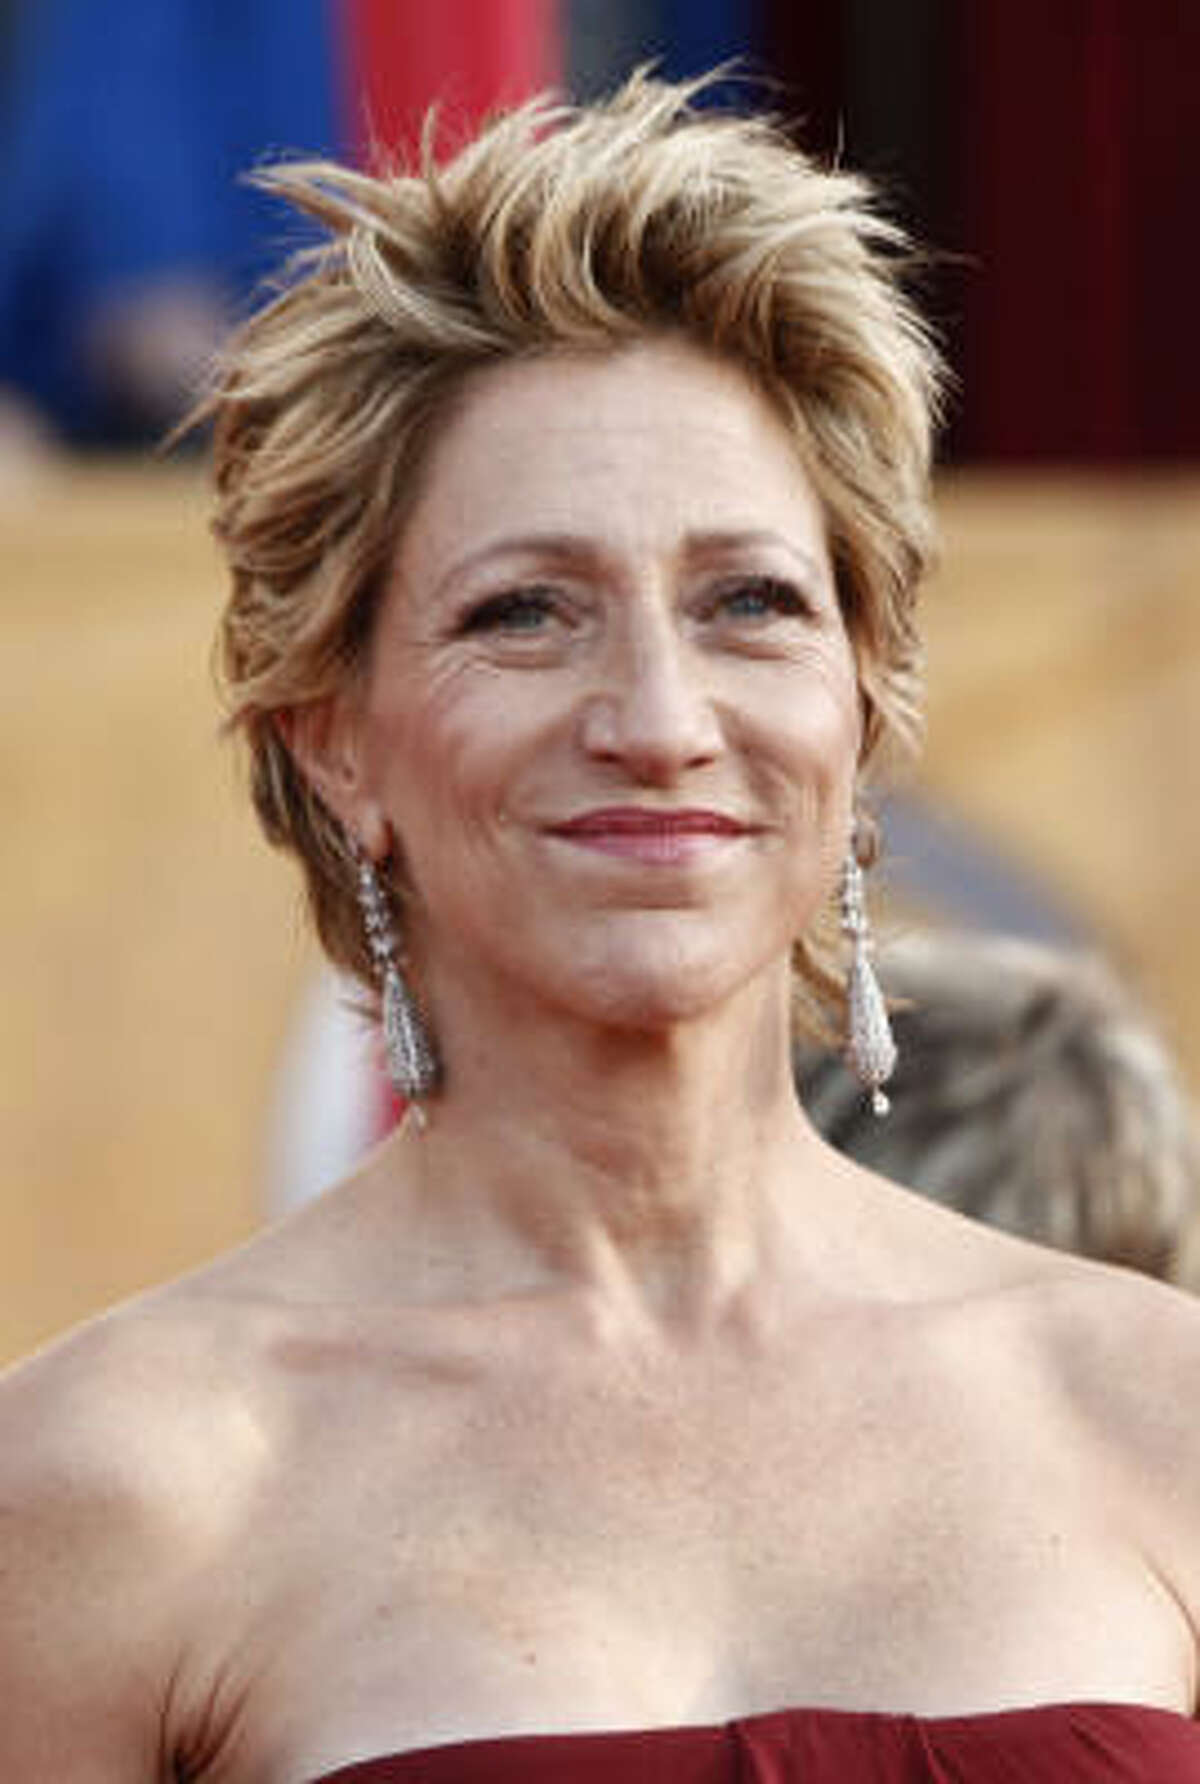 Edie Falco intros the show: "I grew up in Hawaii in a single-parent household. I struggled to succeed in a society that didn't know what to make of me, and now I'm the leader of the free world. Oh my god, that's not me. Sorry. I'm Edie Falco, and I'm an actor."